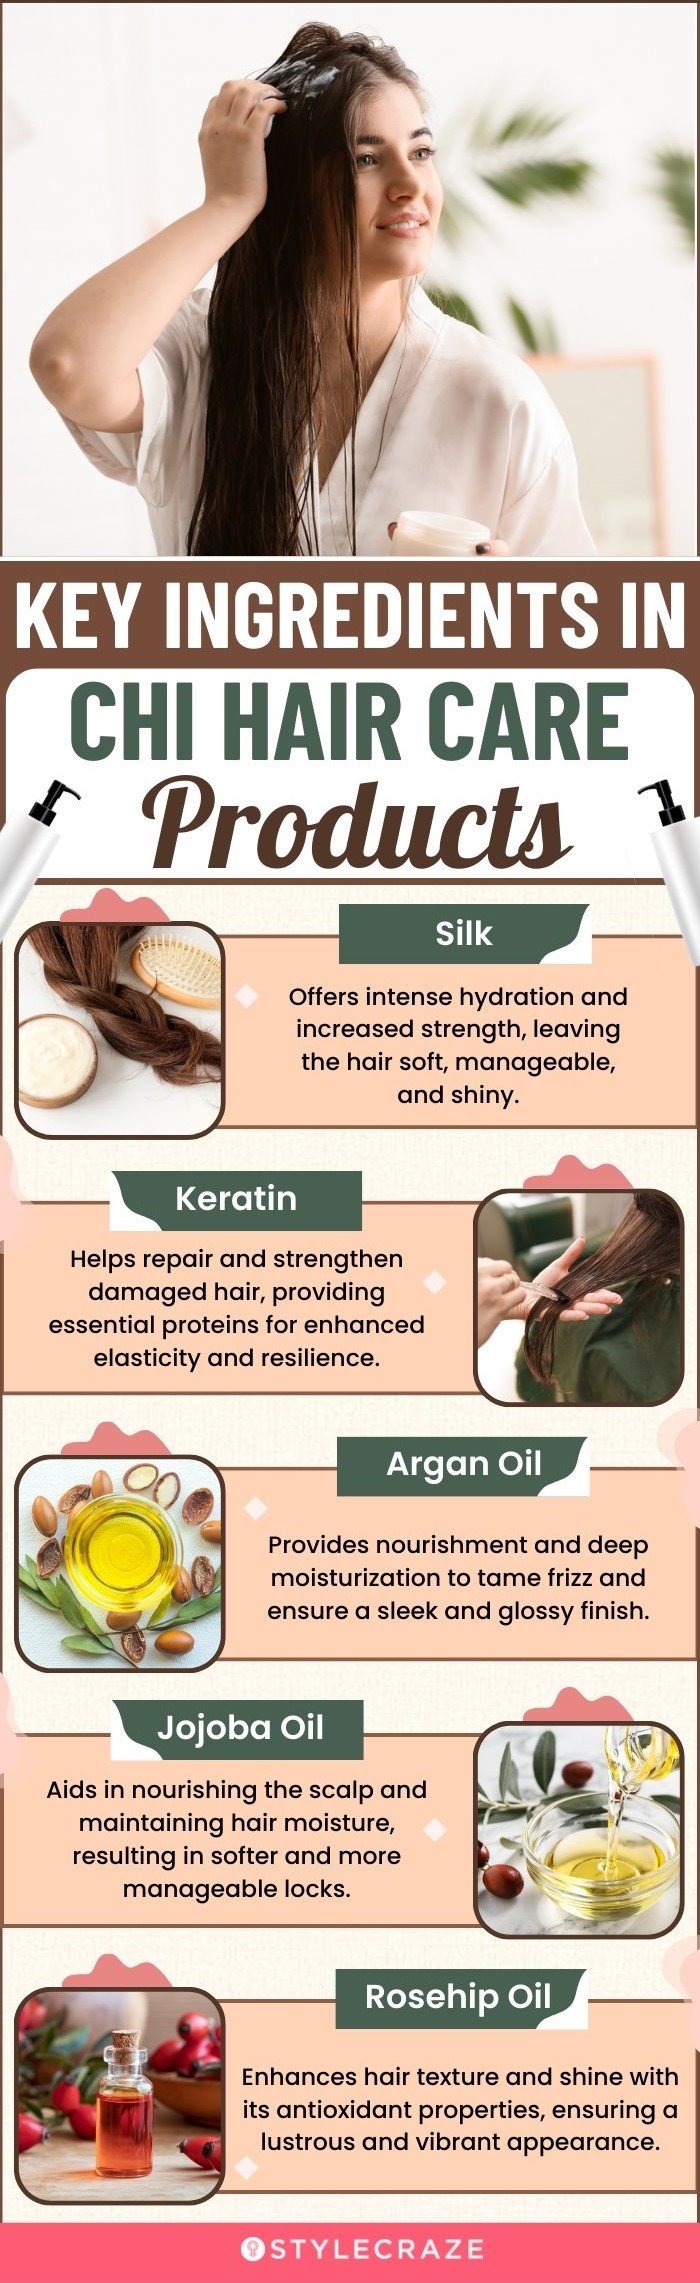 Key Ingredients In CHI Hair Care Product (infographic)